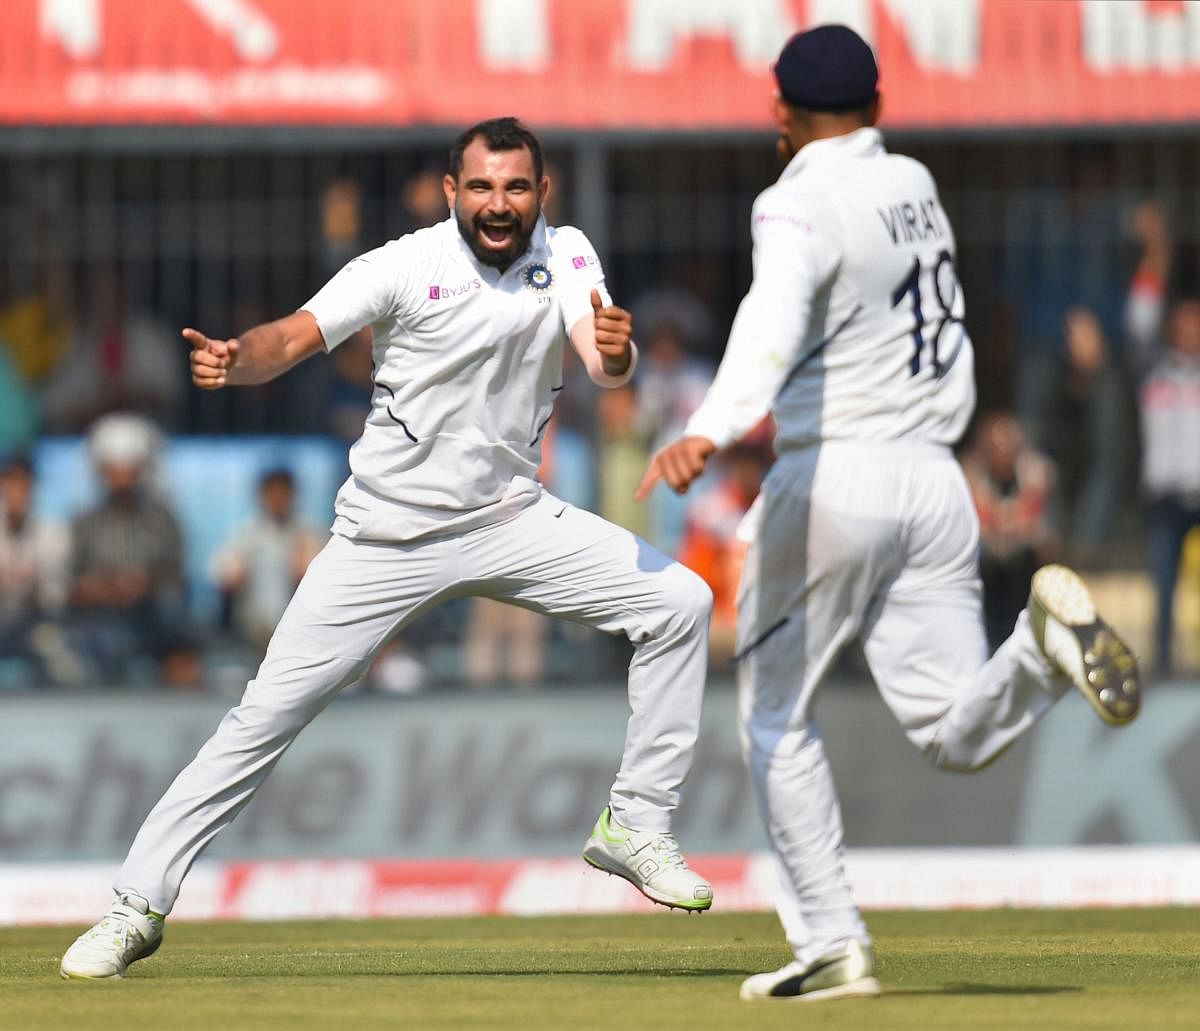 Indian pacer Mohammed Shami celebrates with skipper Virat Kohli after dismissing Bangladesh's Mushfiqur Rahim on the opening day of the first Test match  in Indore on Thursday. PTI